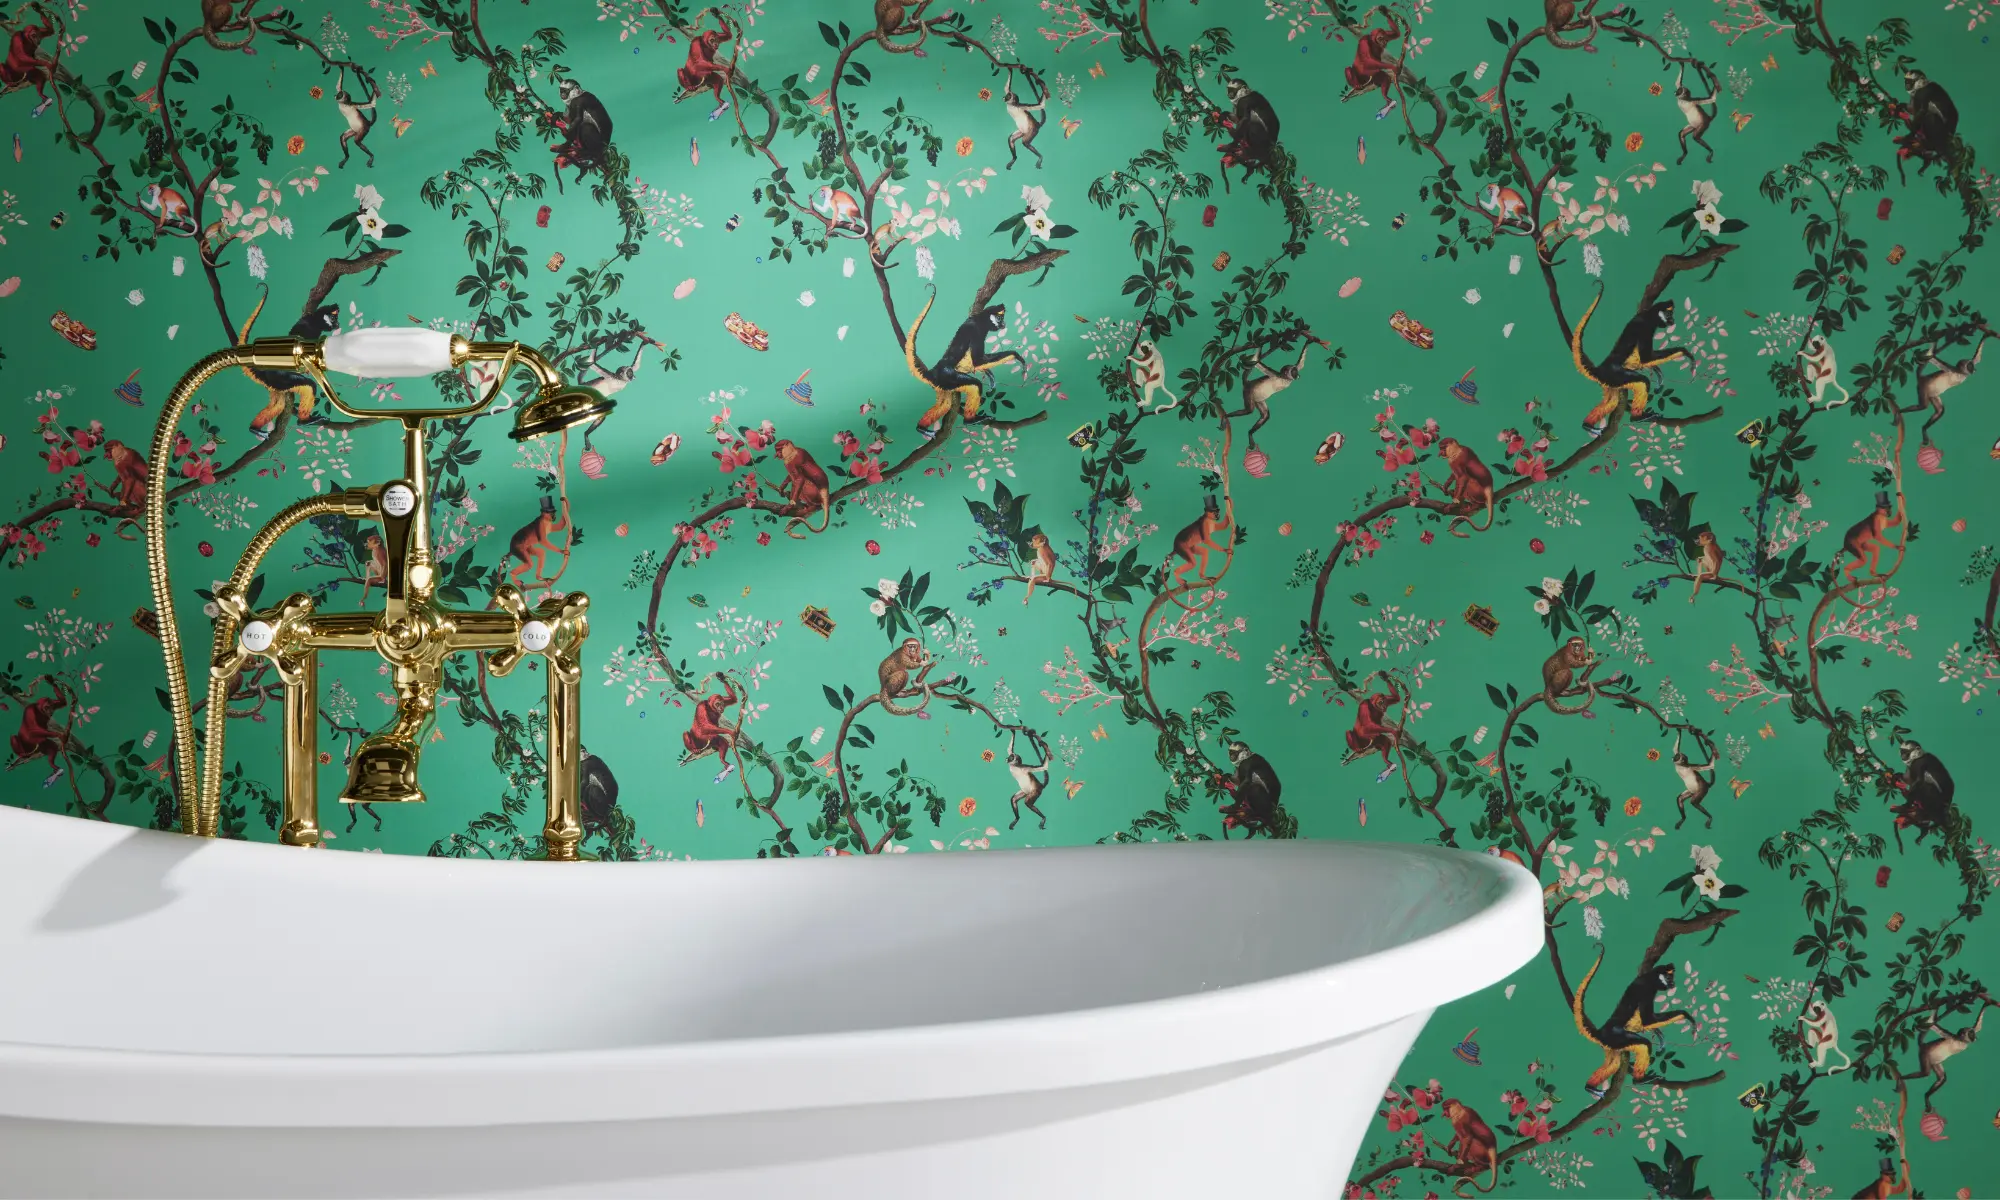 Vintage tub against wall with monkey wallpaper